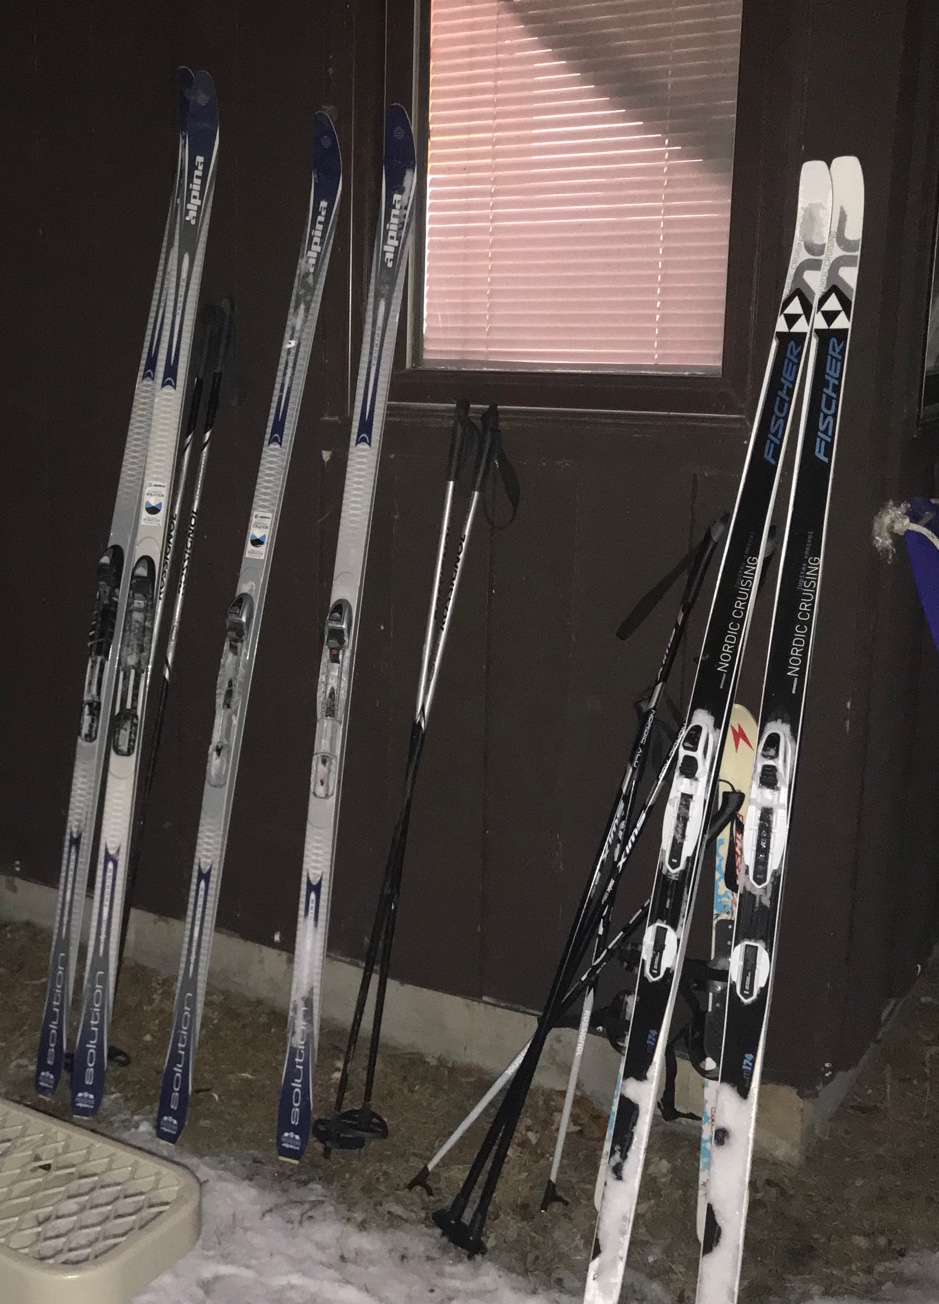 skis resting against the building